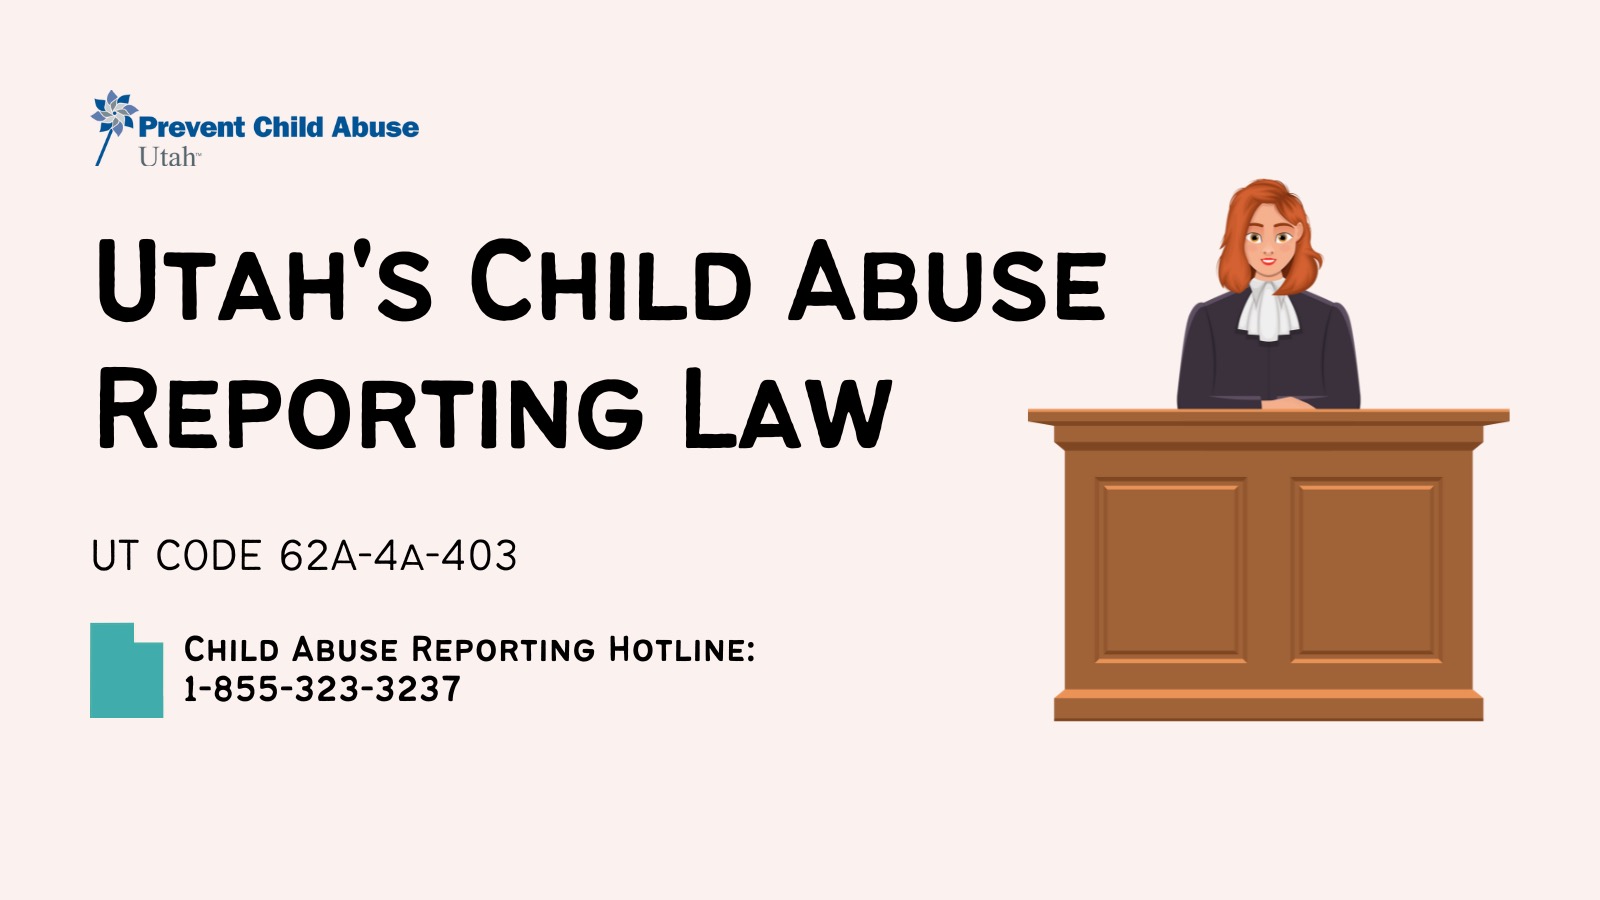 Featured image for “Utah’s Child Abuse Reporting Law”